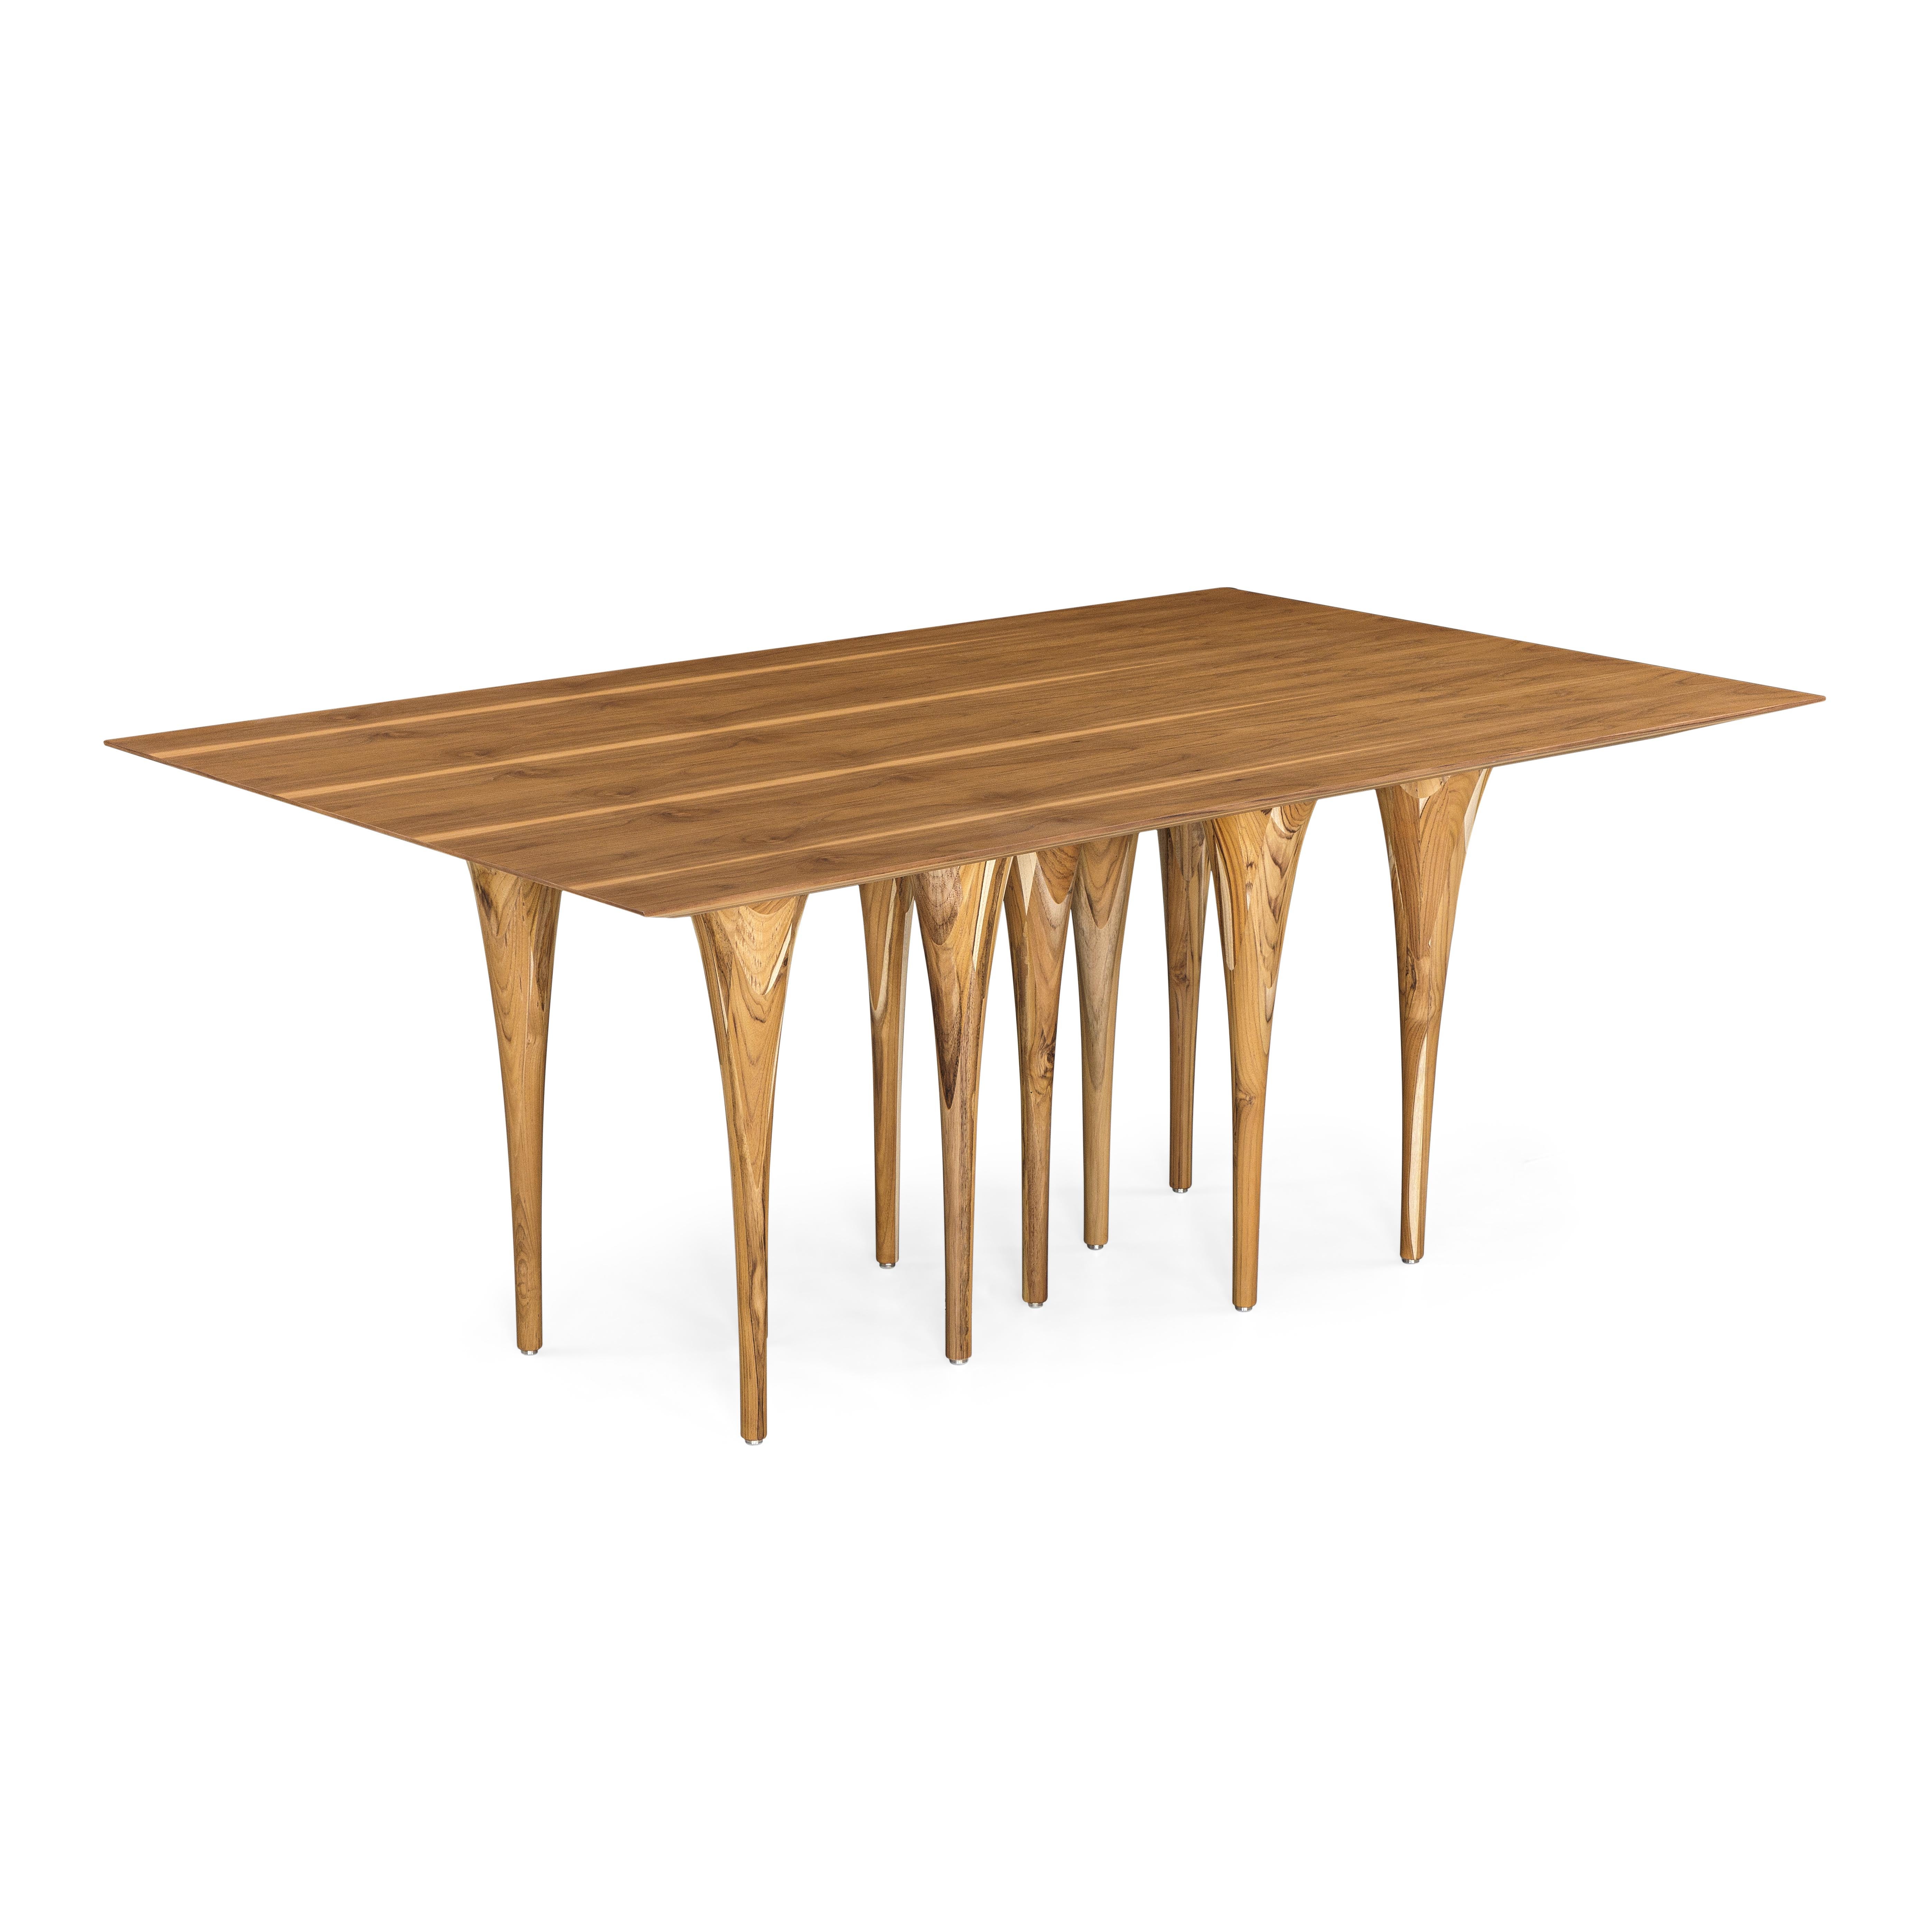 Contemporary Pin Dining Table with a Teak Wood Veneered Table Top and 10 Legs 71'' For Sale